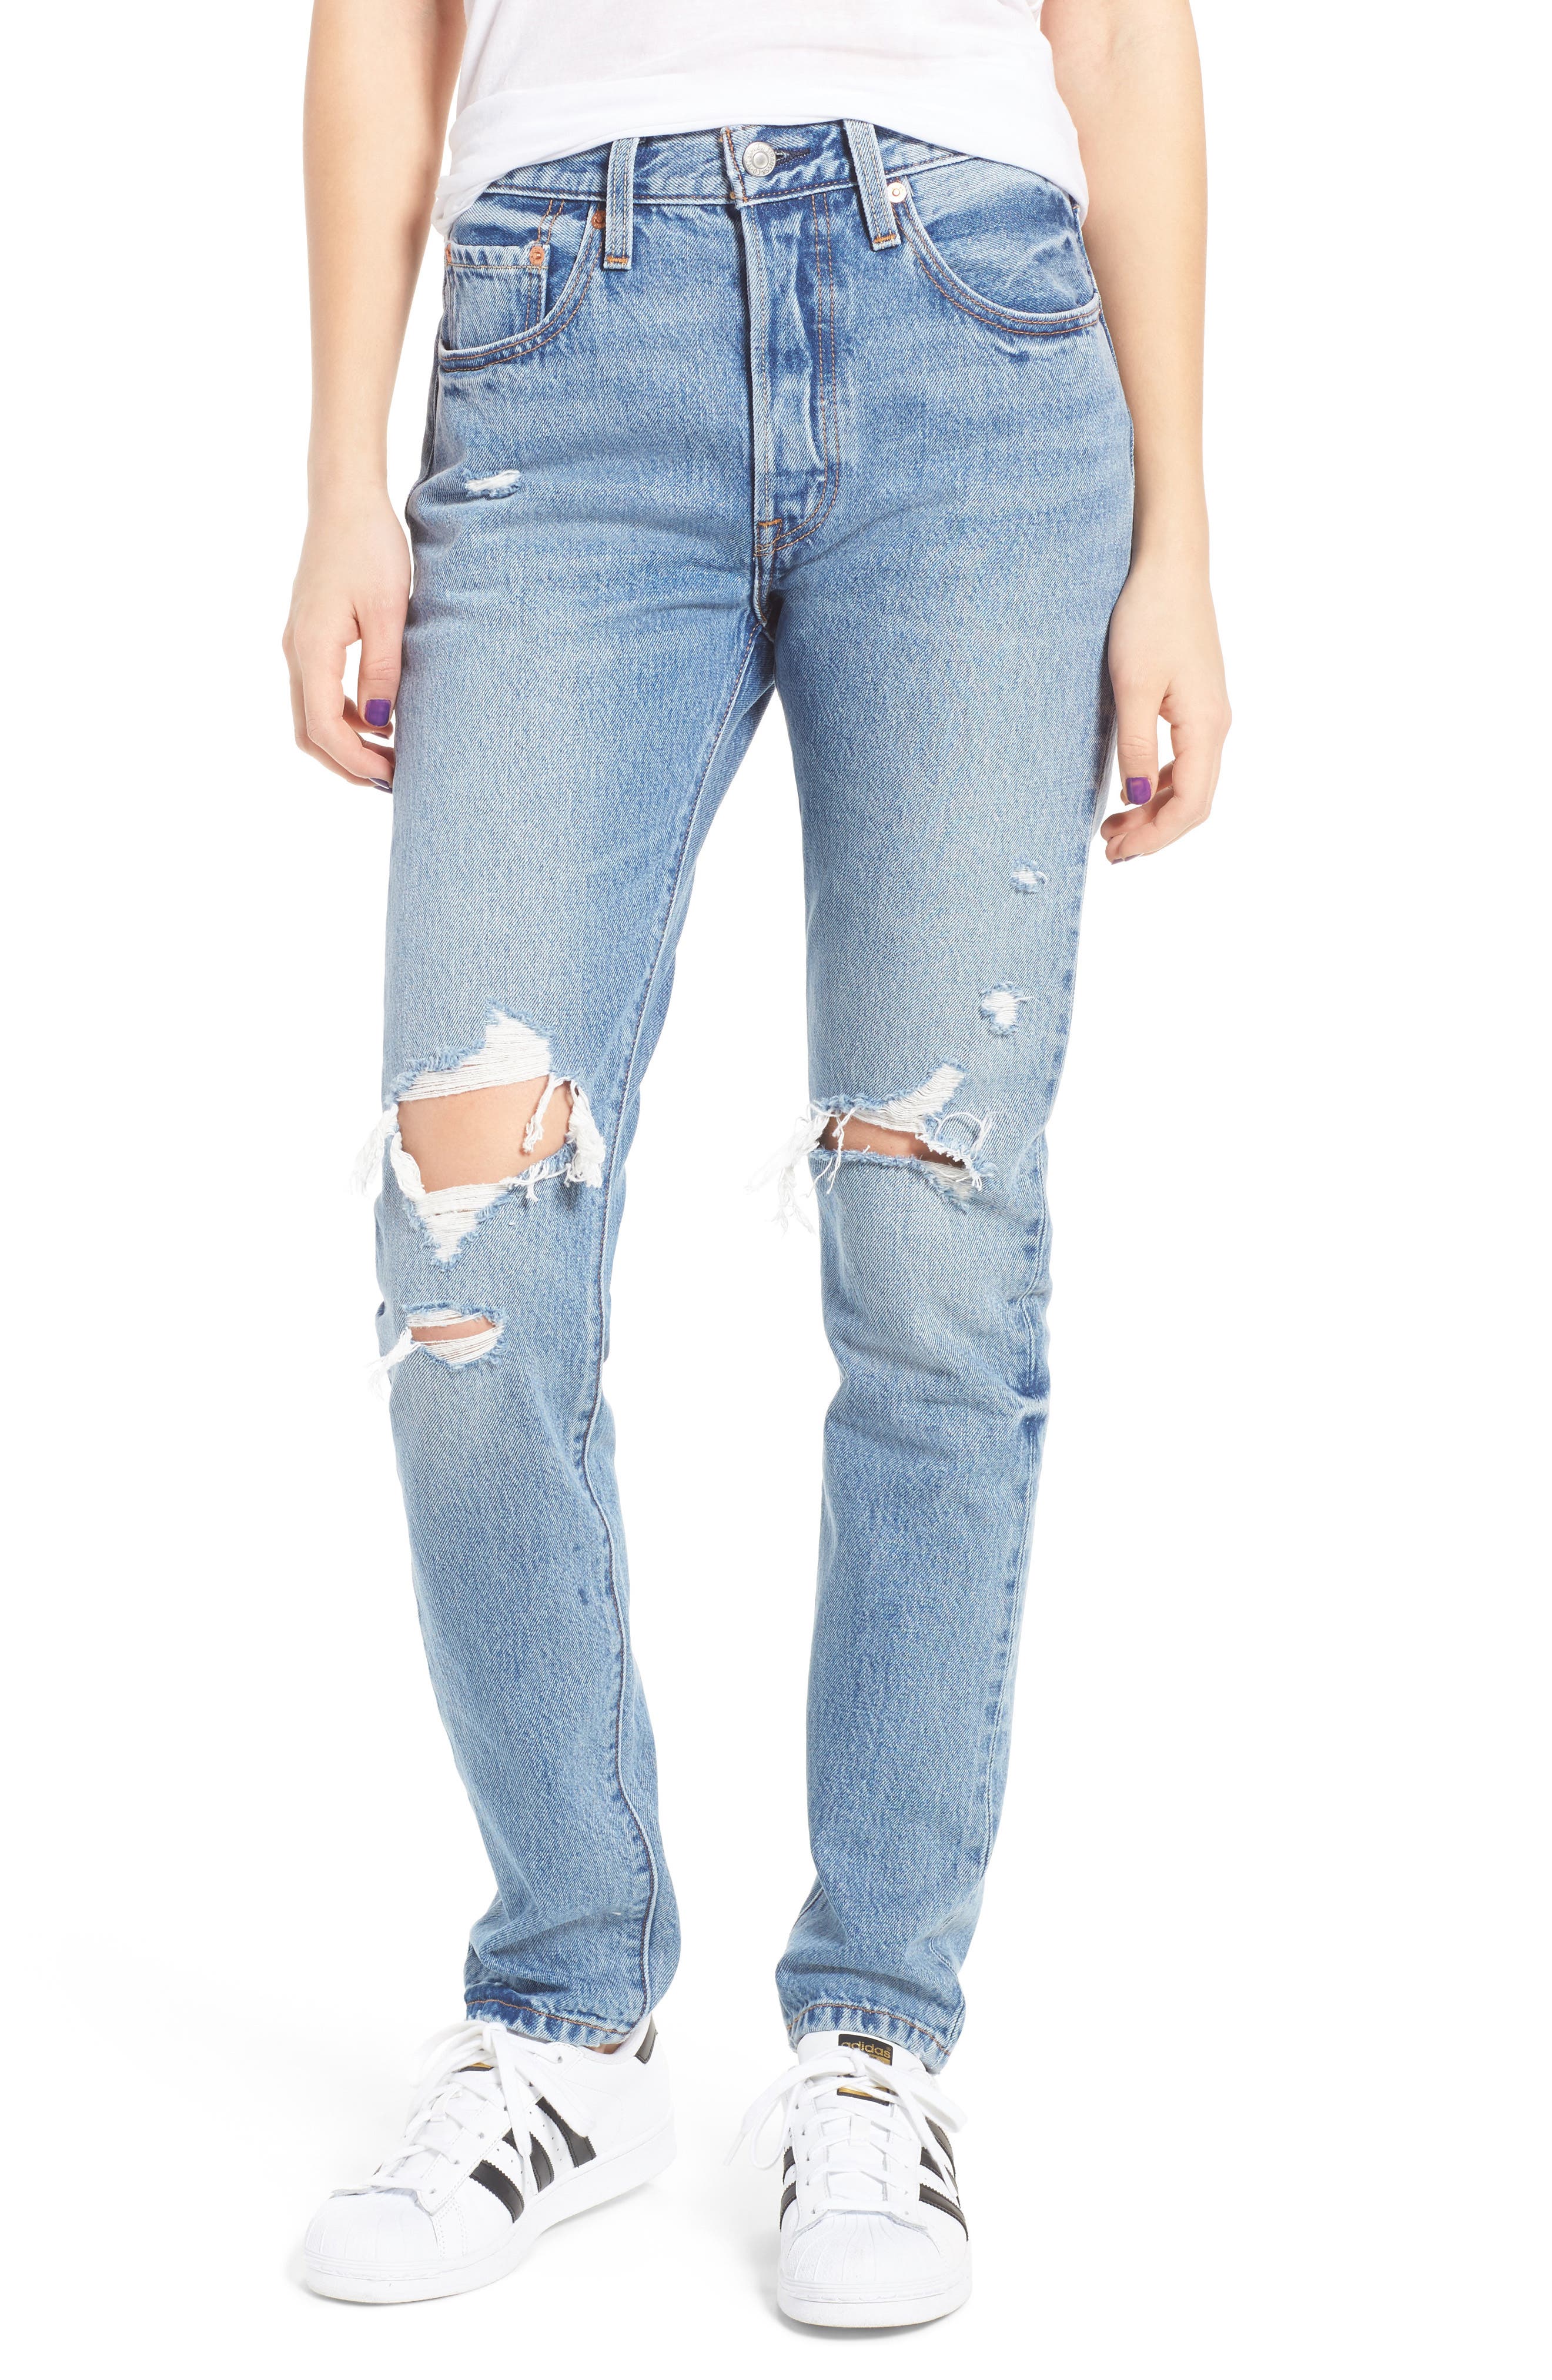 levi's 501 skinny jeans in old hangouts